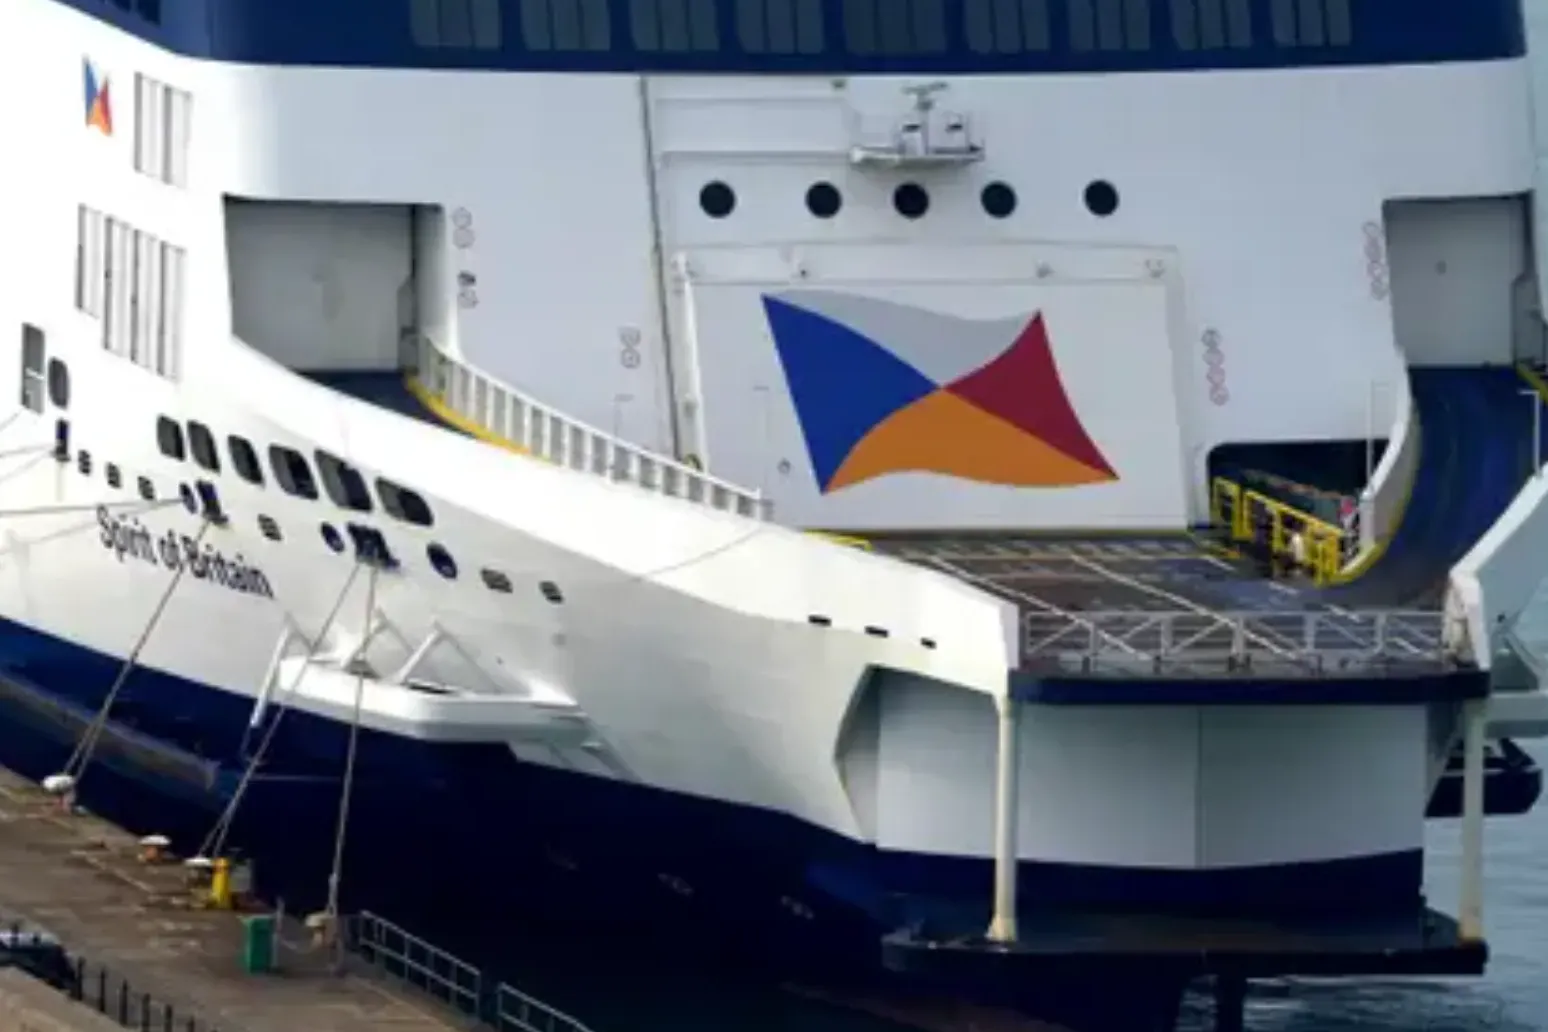 P&O’s Pride of Kent remains detained after additional deficiencies found 